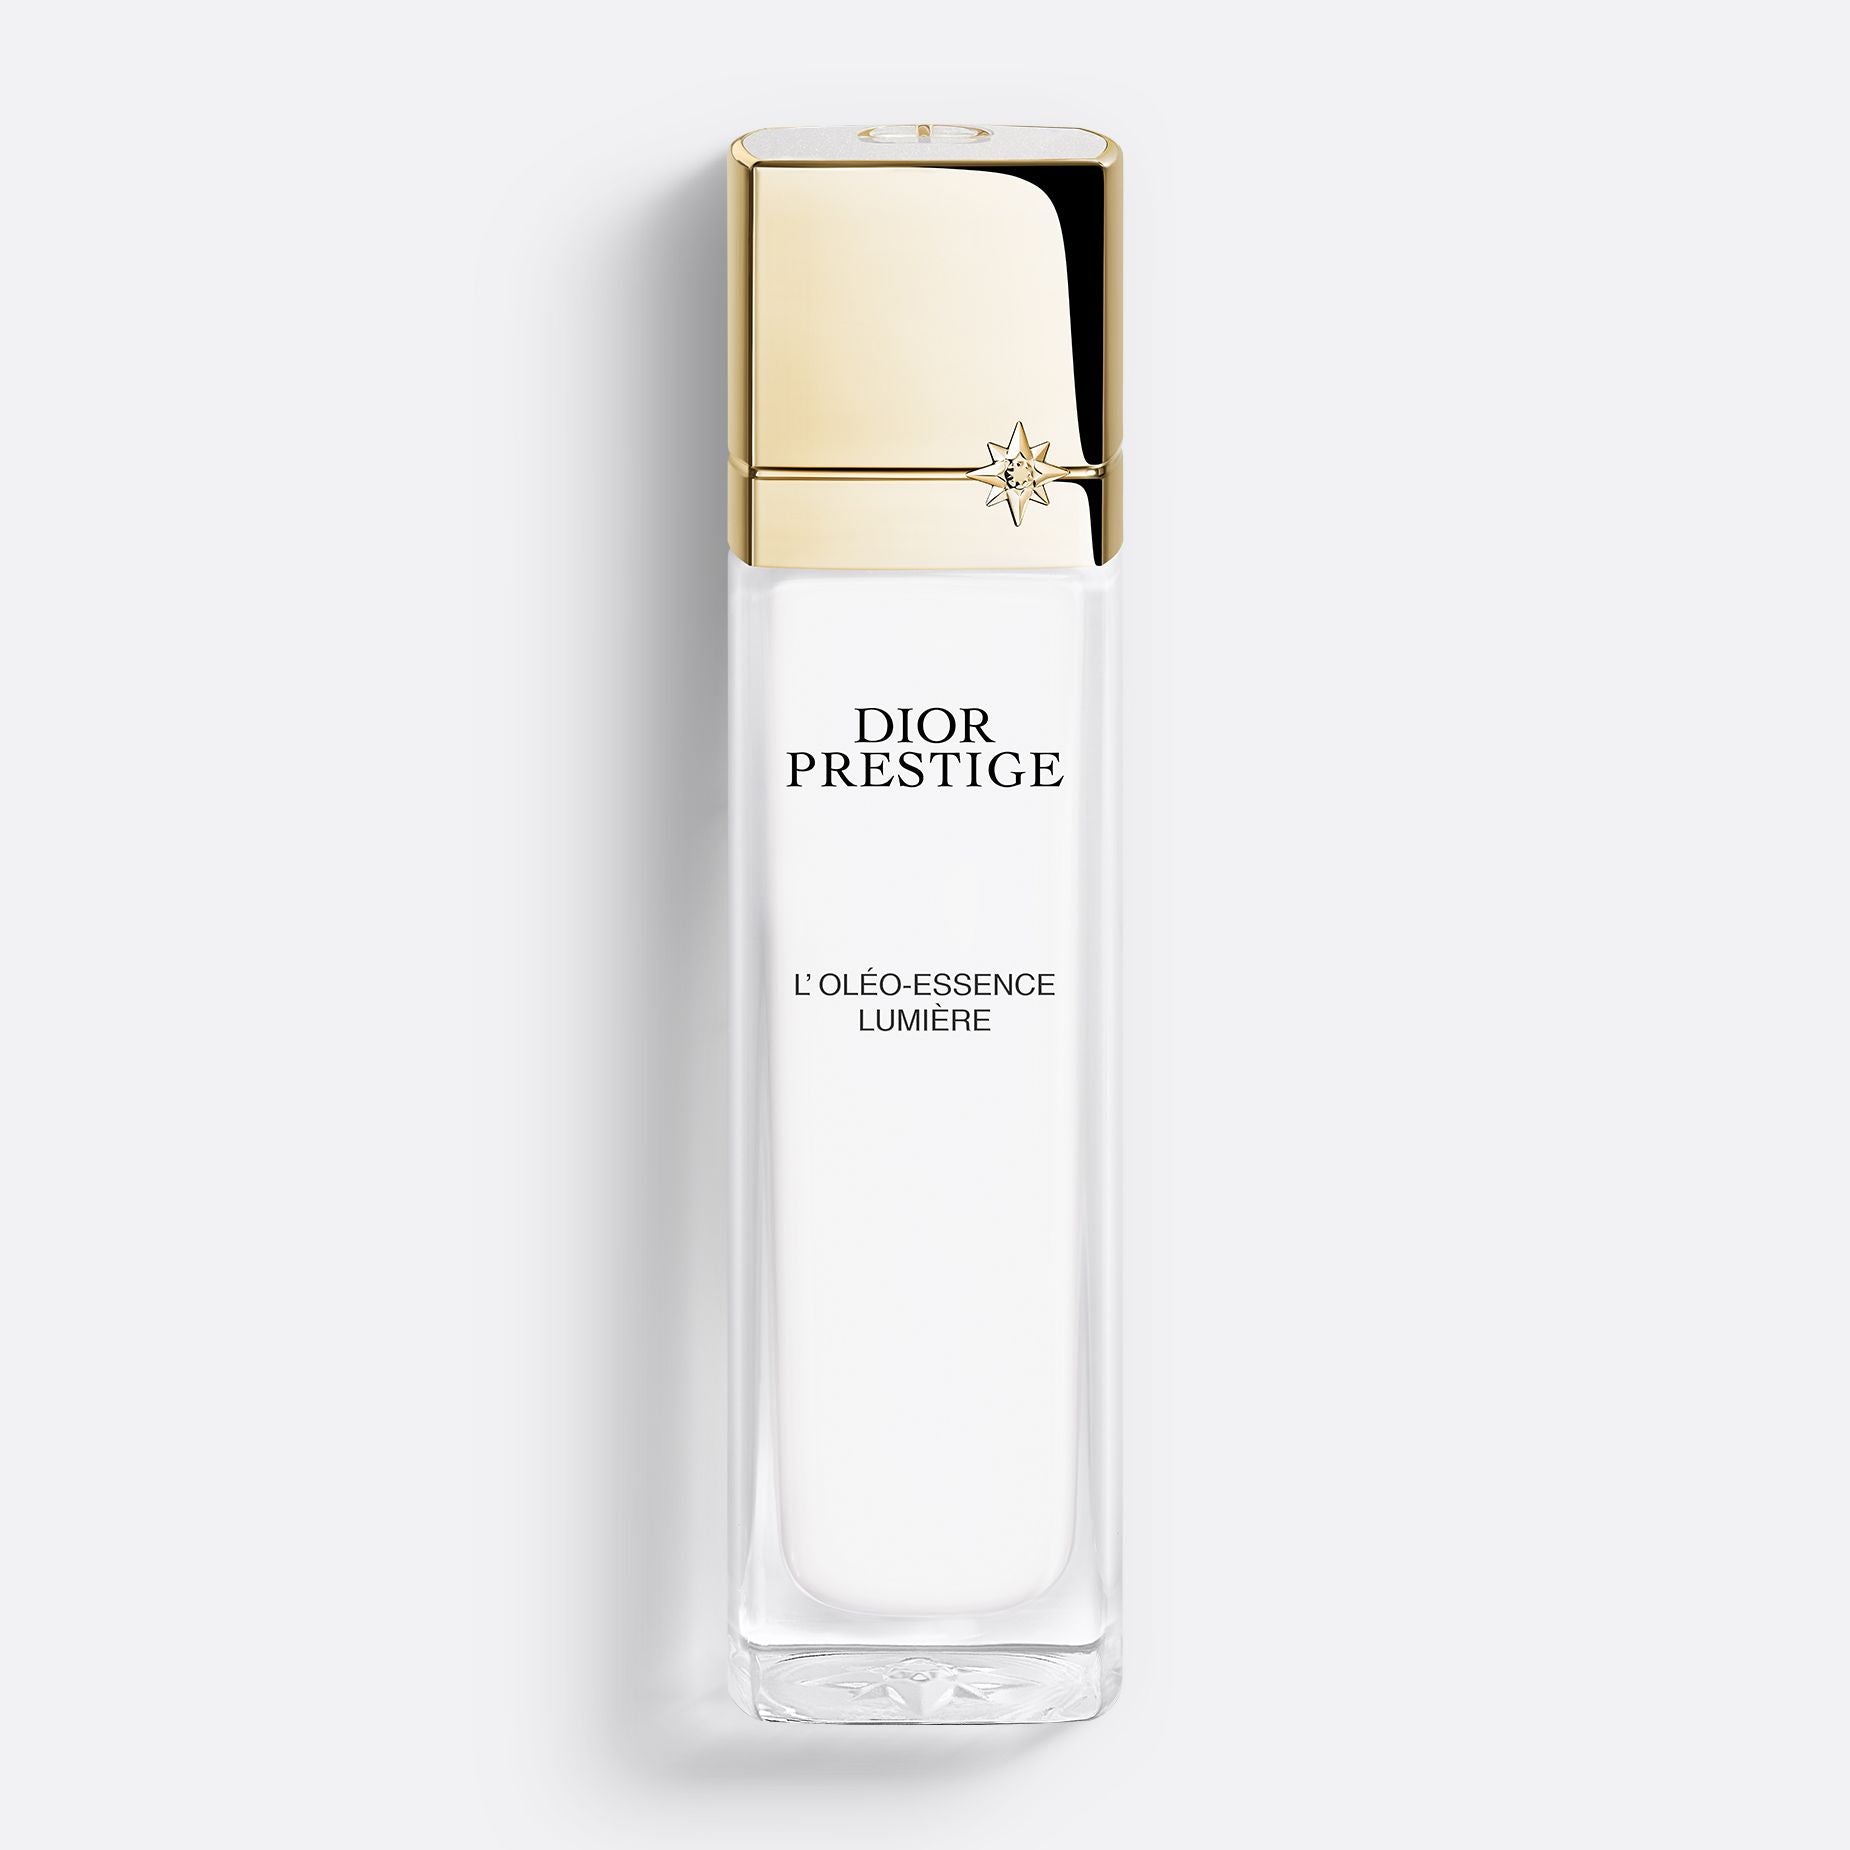 DIOR PRESTIGE L’OLÉO-ESSENCE LUMIÈRE ~ Exfoliating and Brightening Lotion - Face and Neck